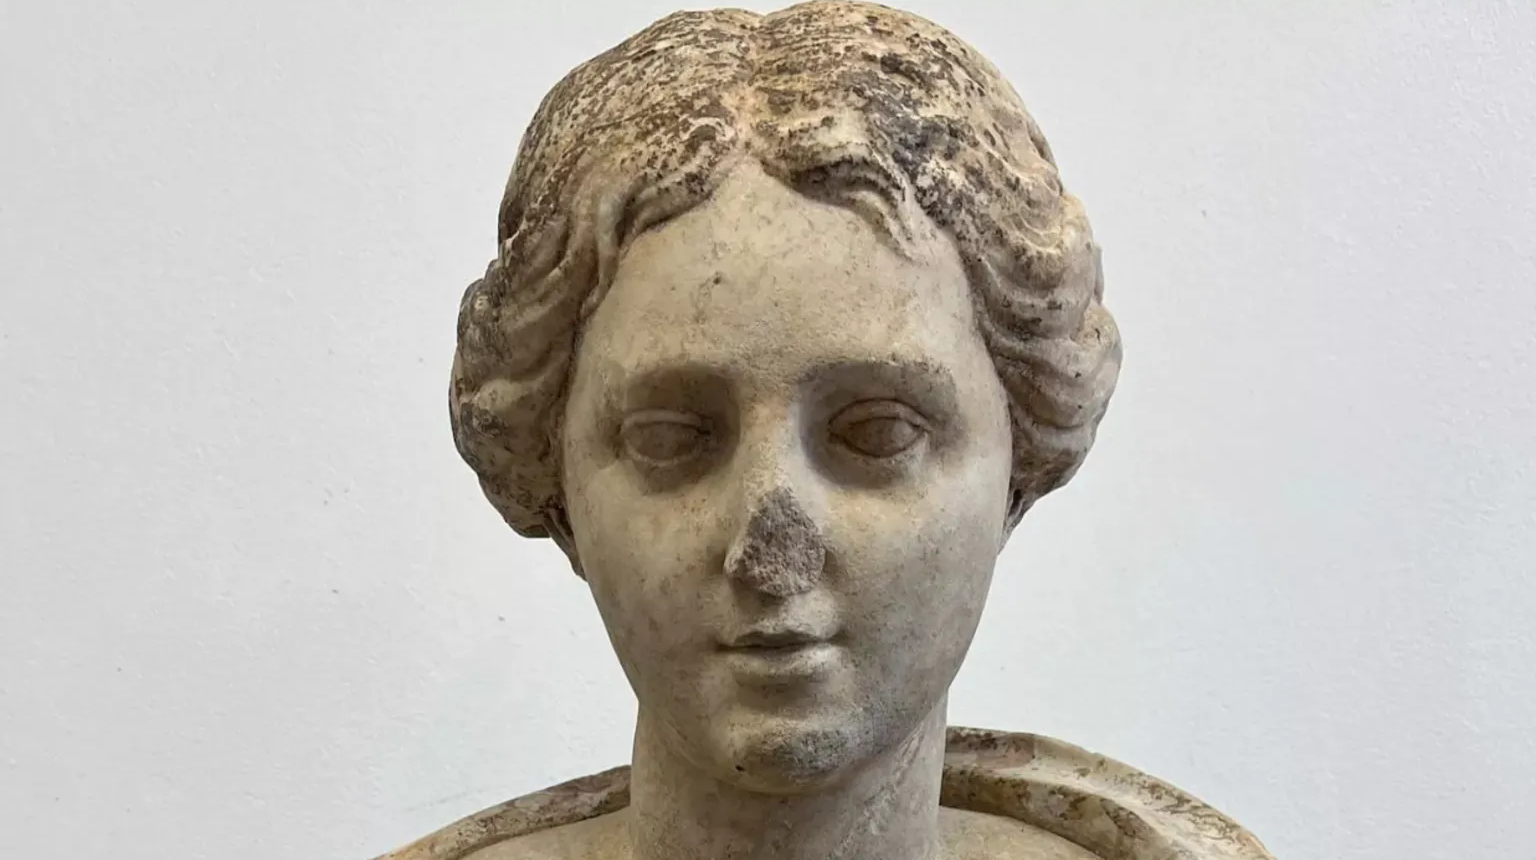 An 1,800-year-old Roman sculpture was discovered in Britain